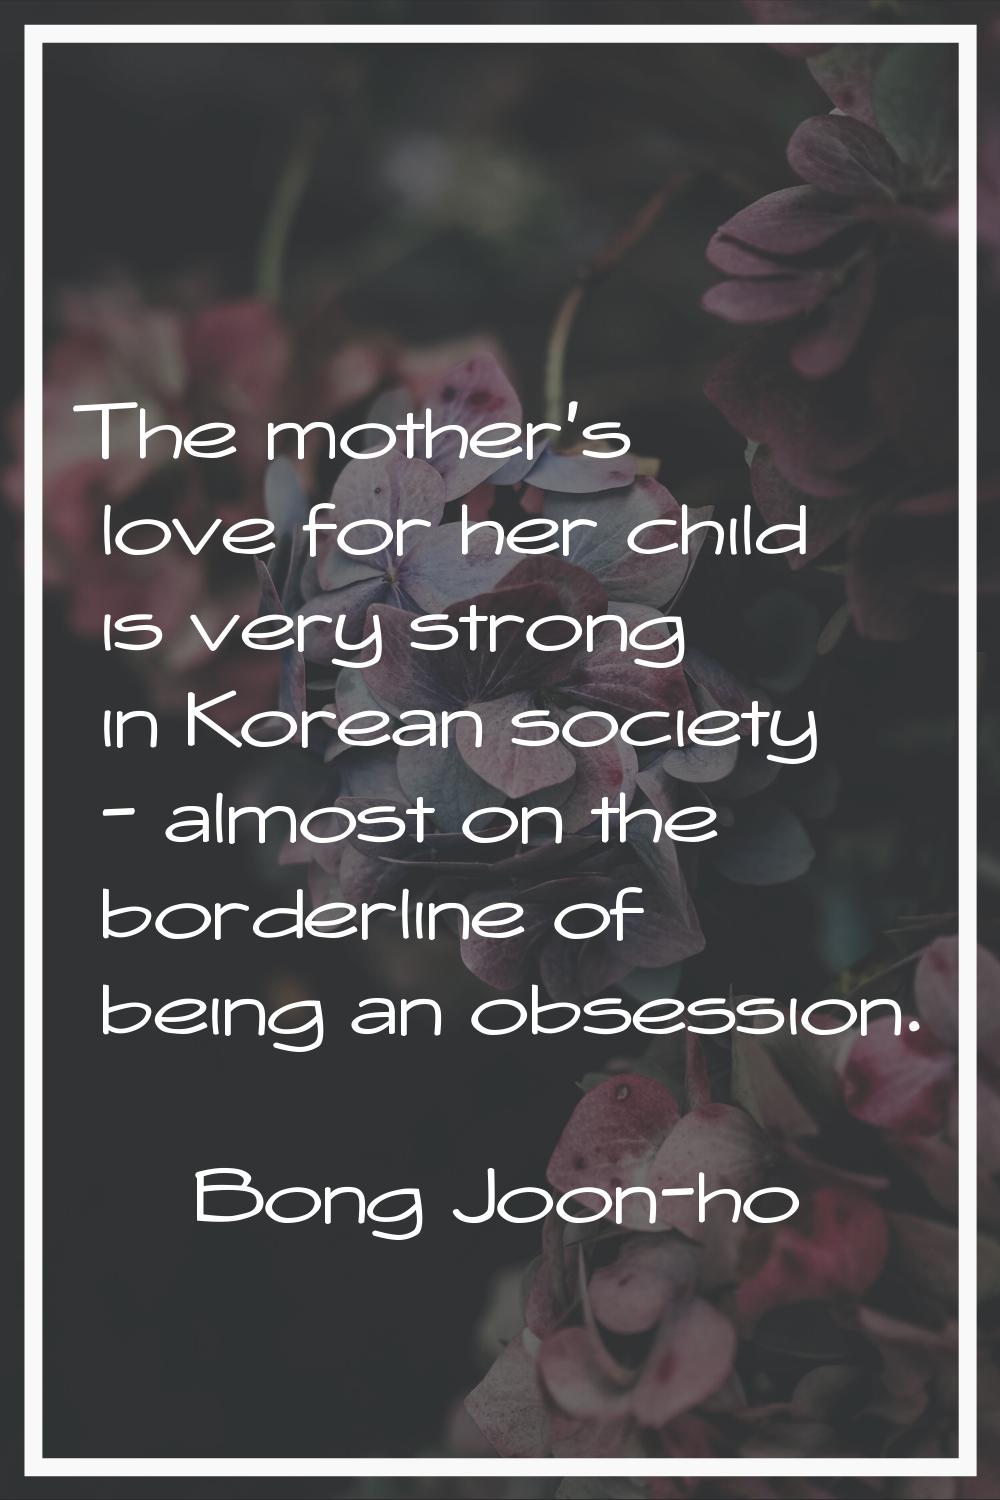 The mother's love for her child is very strong in Korean society - almost on the borderline of bein